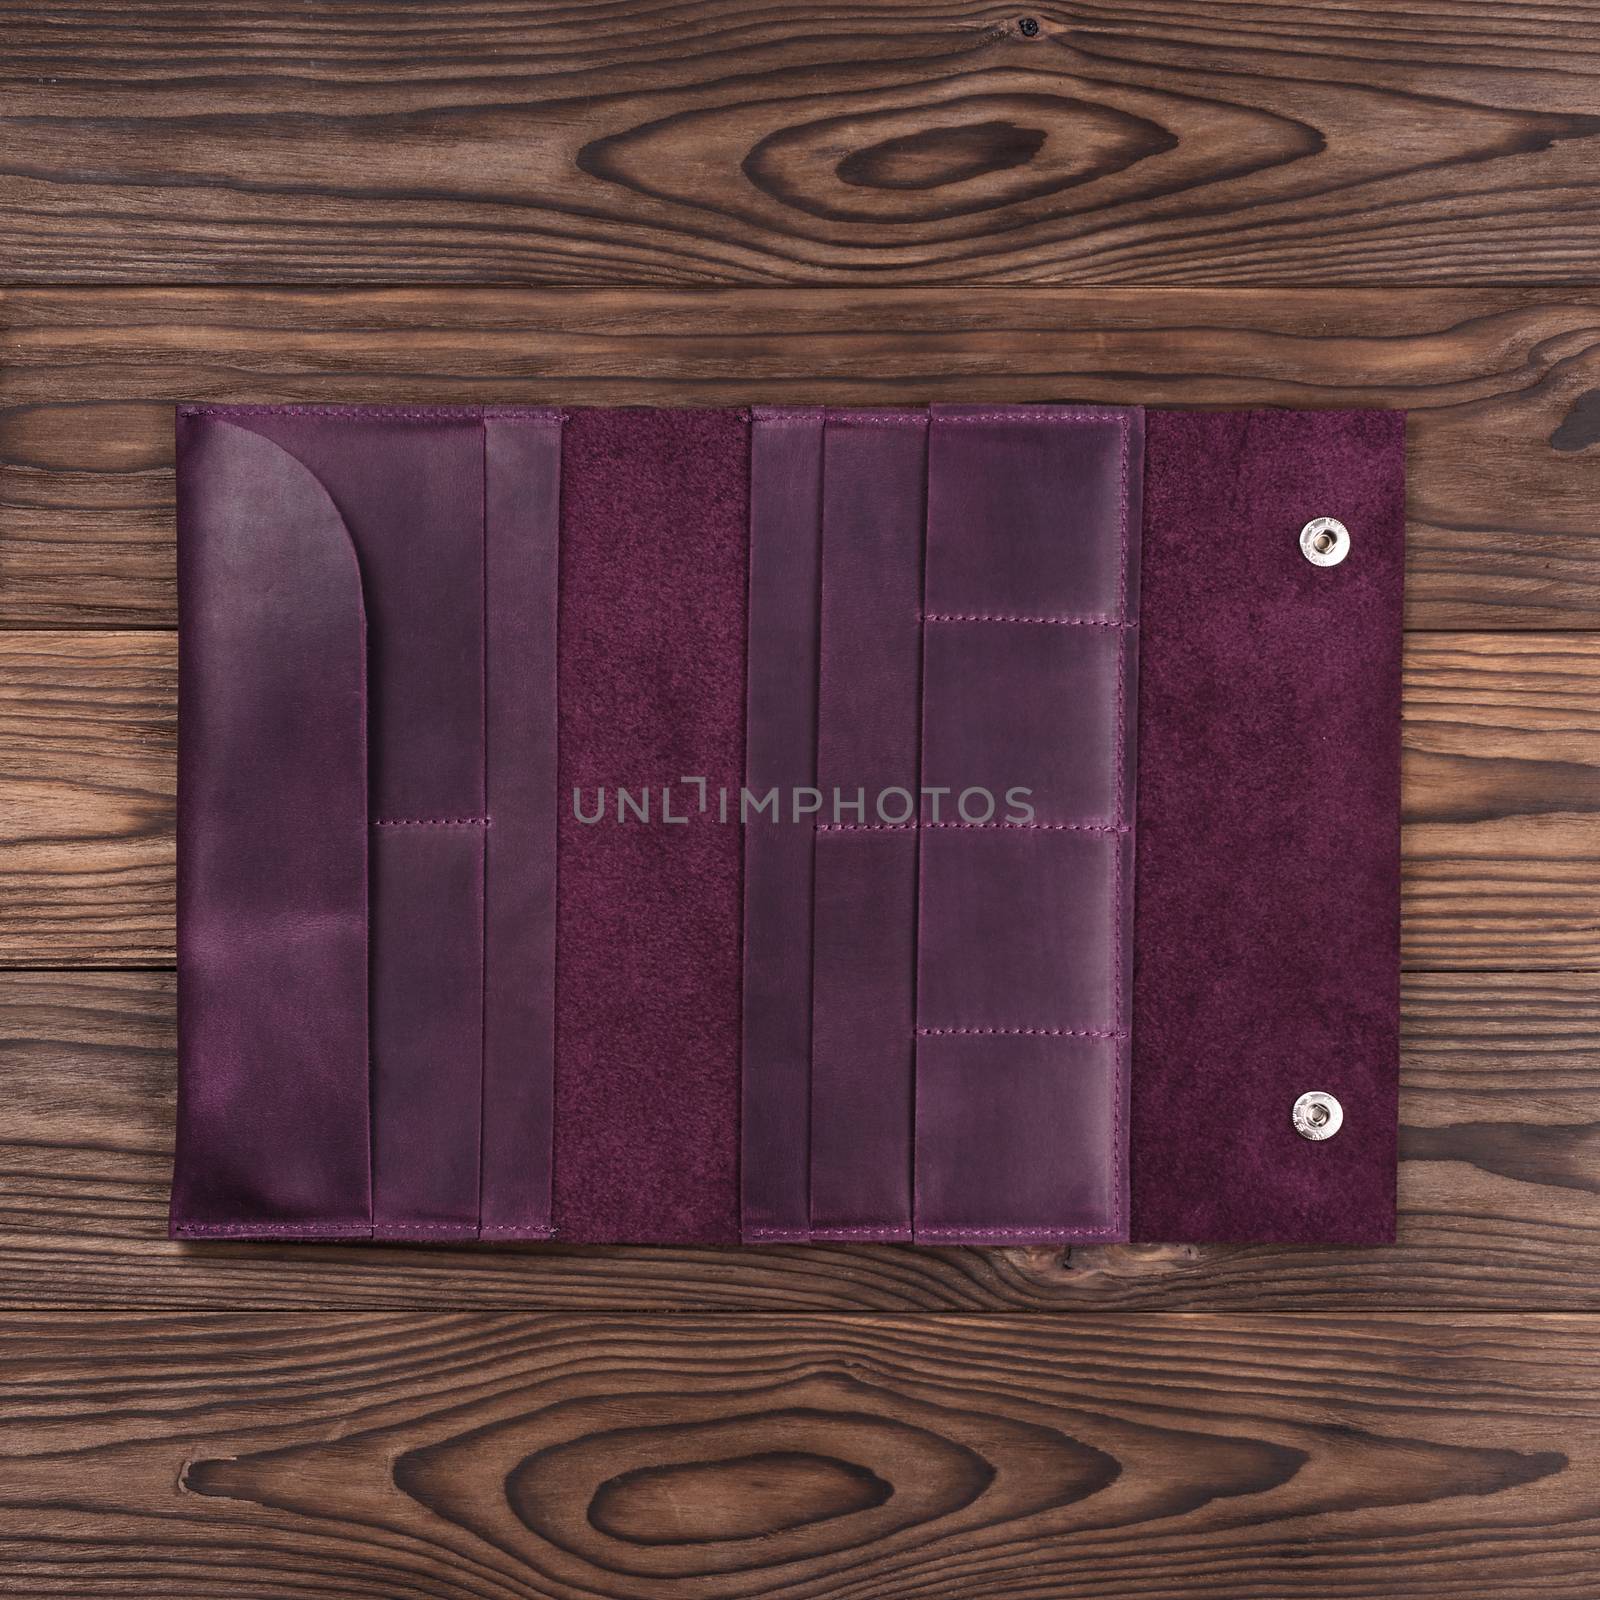 Purple handmade travel wallet lies on textured wooden backgroud closeup. Wallet is open and empty. Up to down view. Stock photo of businessman accessories.